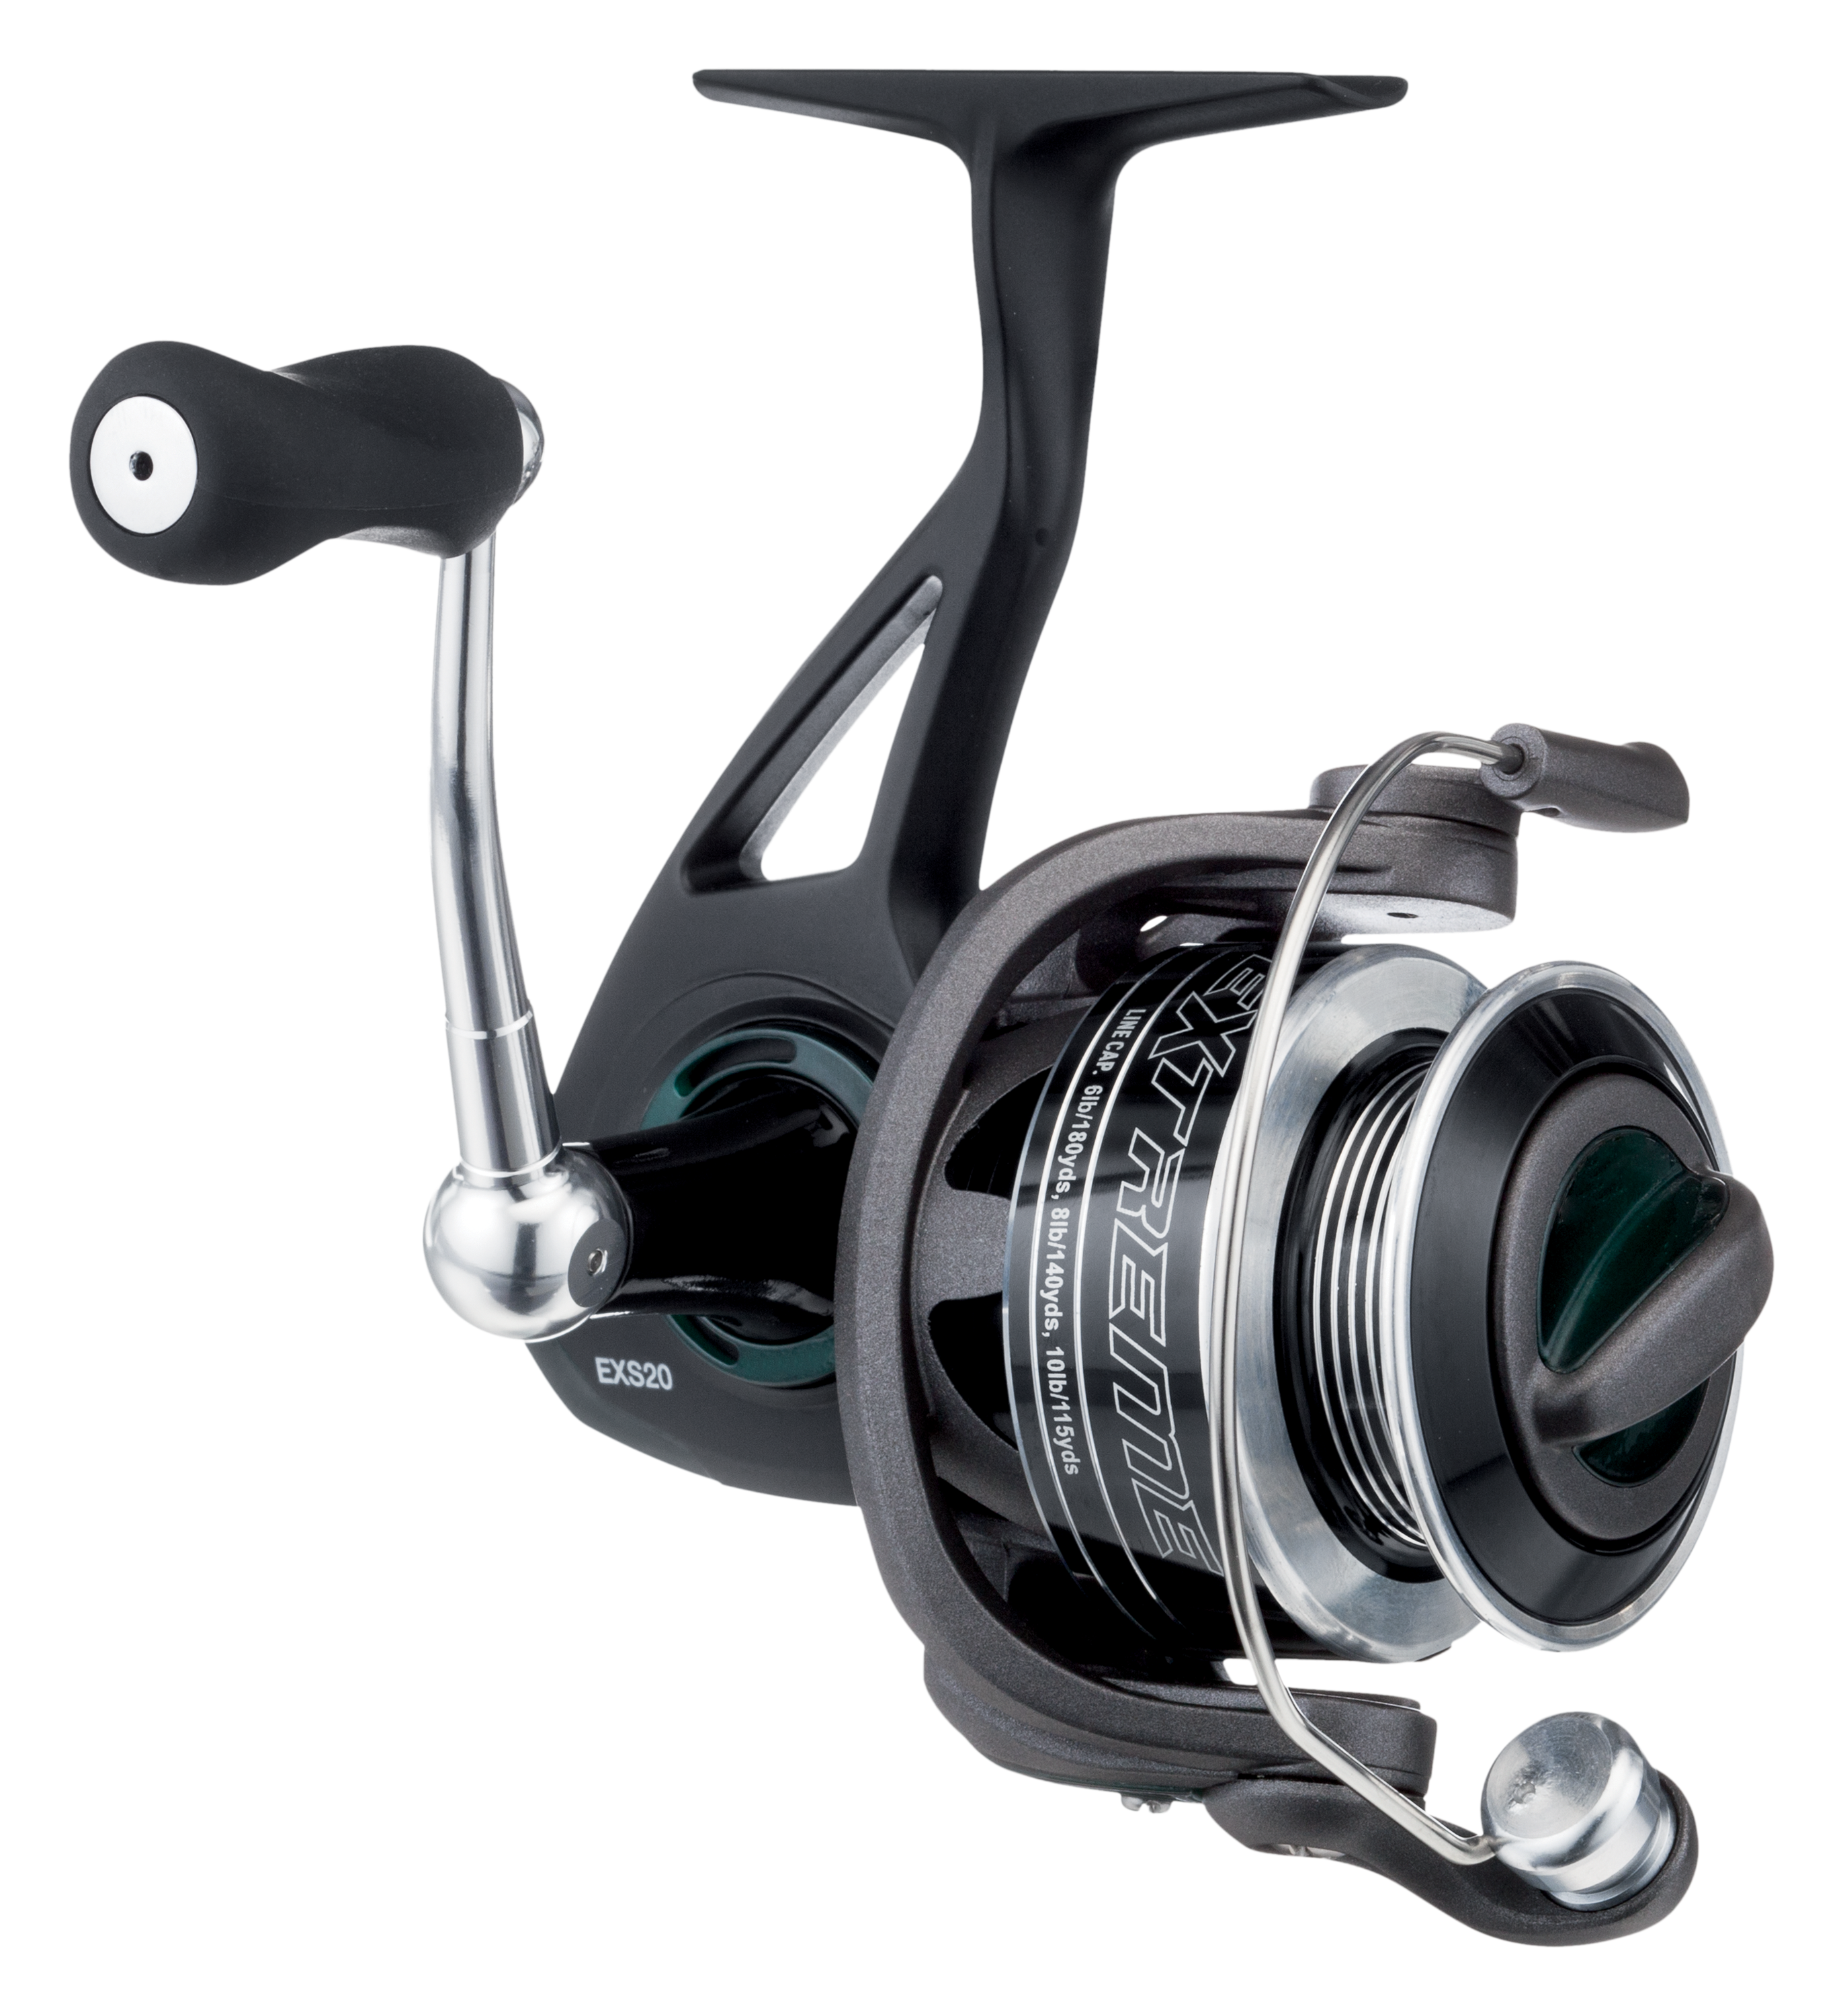 Bass Pro Shops Extreme Spinning Reel